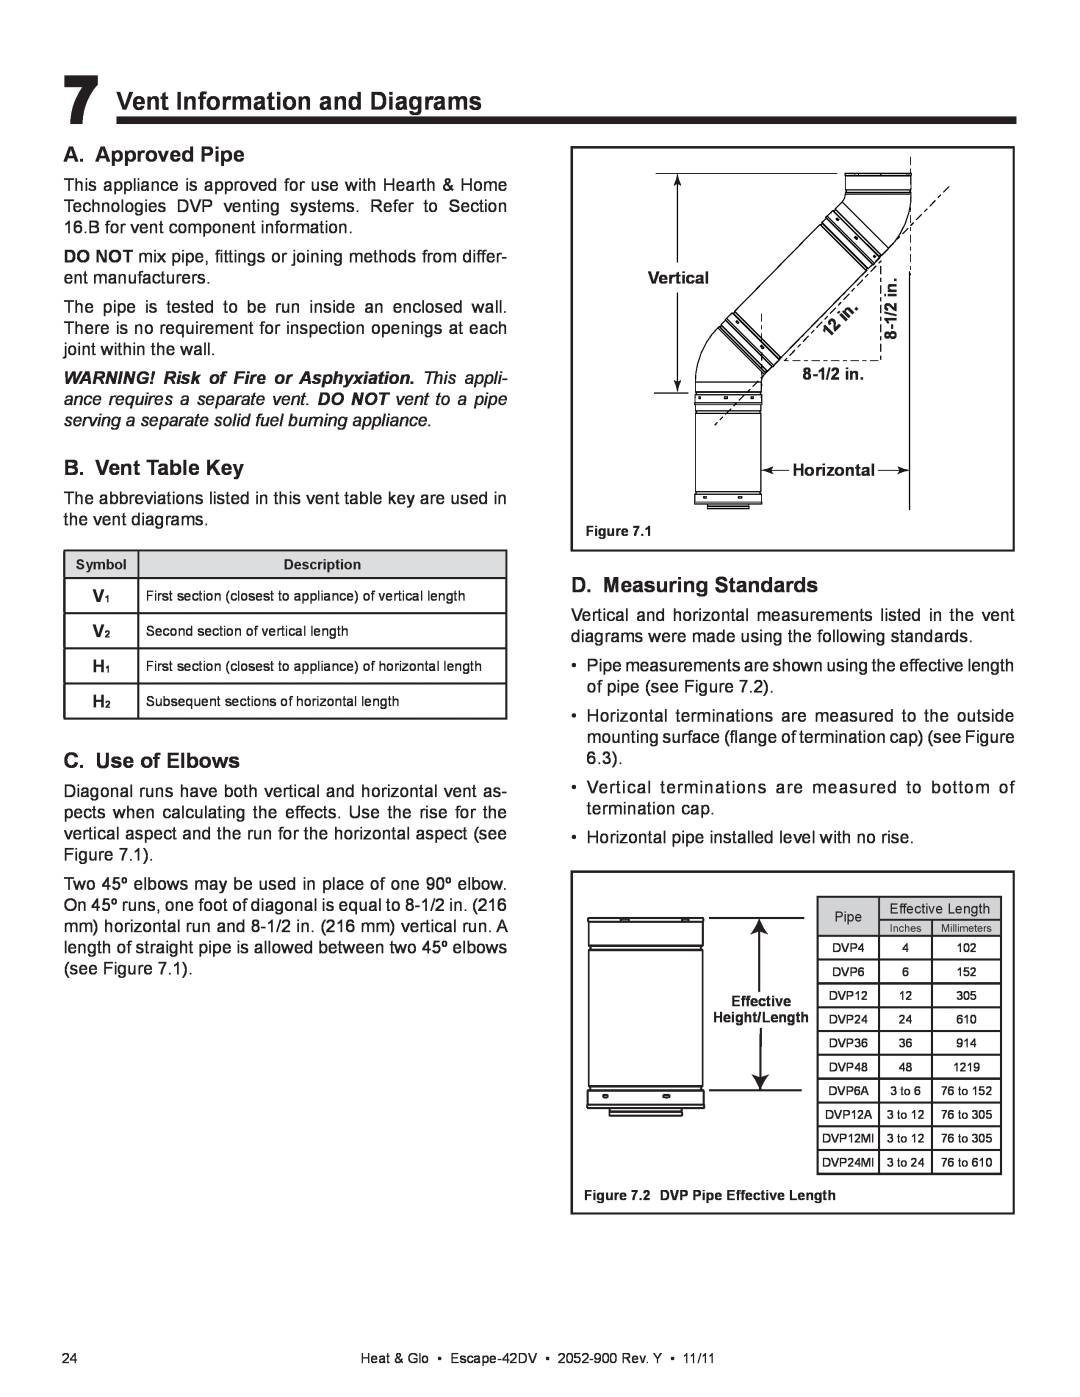 Heat & Glo LifeStyle Escape-42DV 7Vent Information and Diagrams, A. Approved Pipe, B. Vent Table Key, C. Use of Elbows 